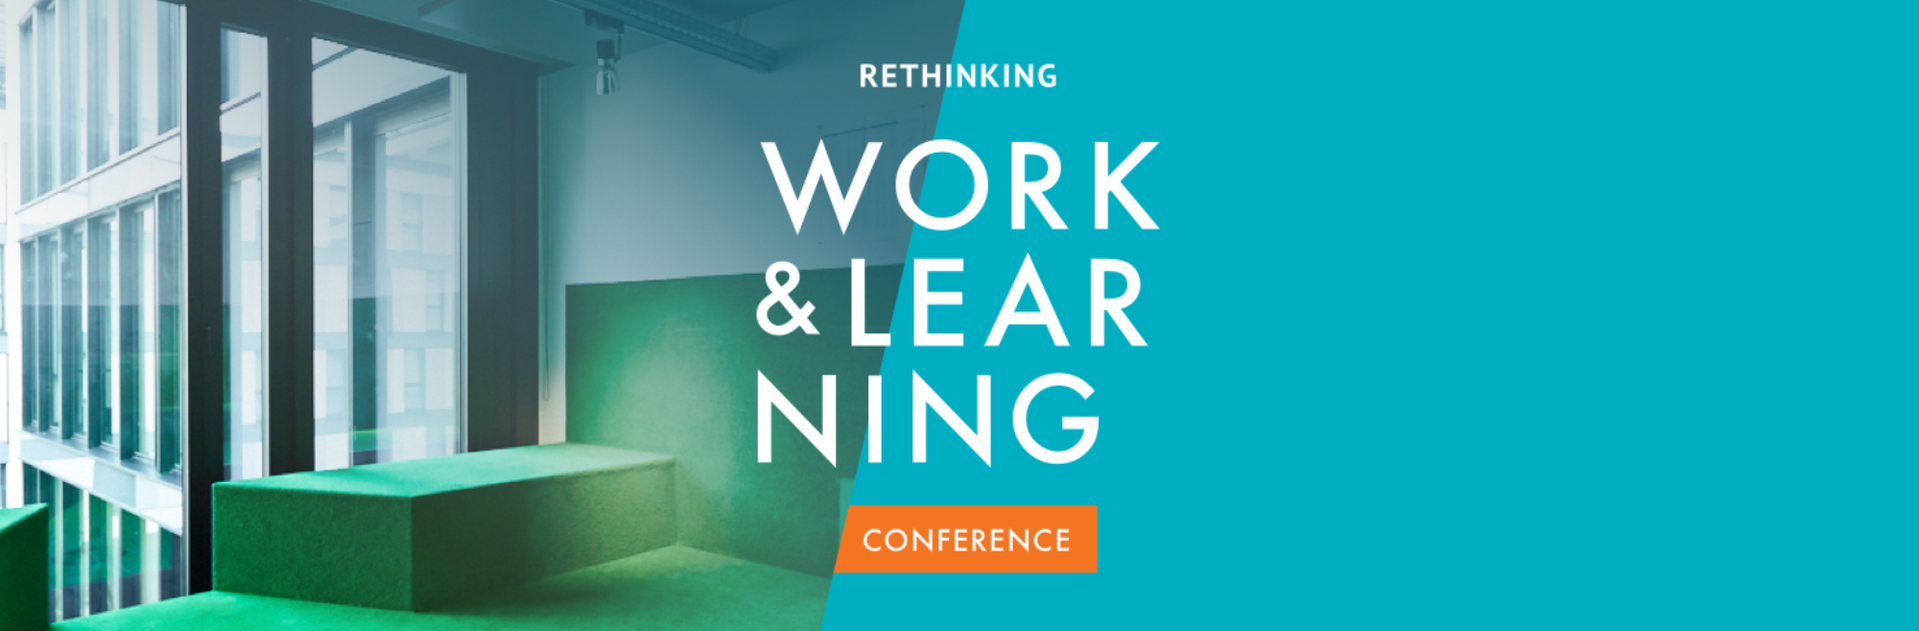 Impressions of the Rethinking Work & Learning Conference